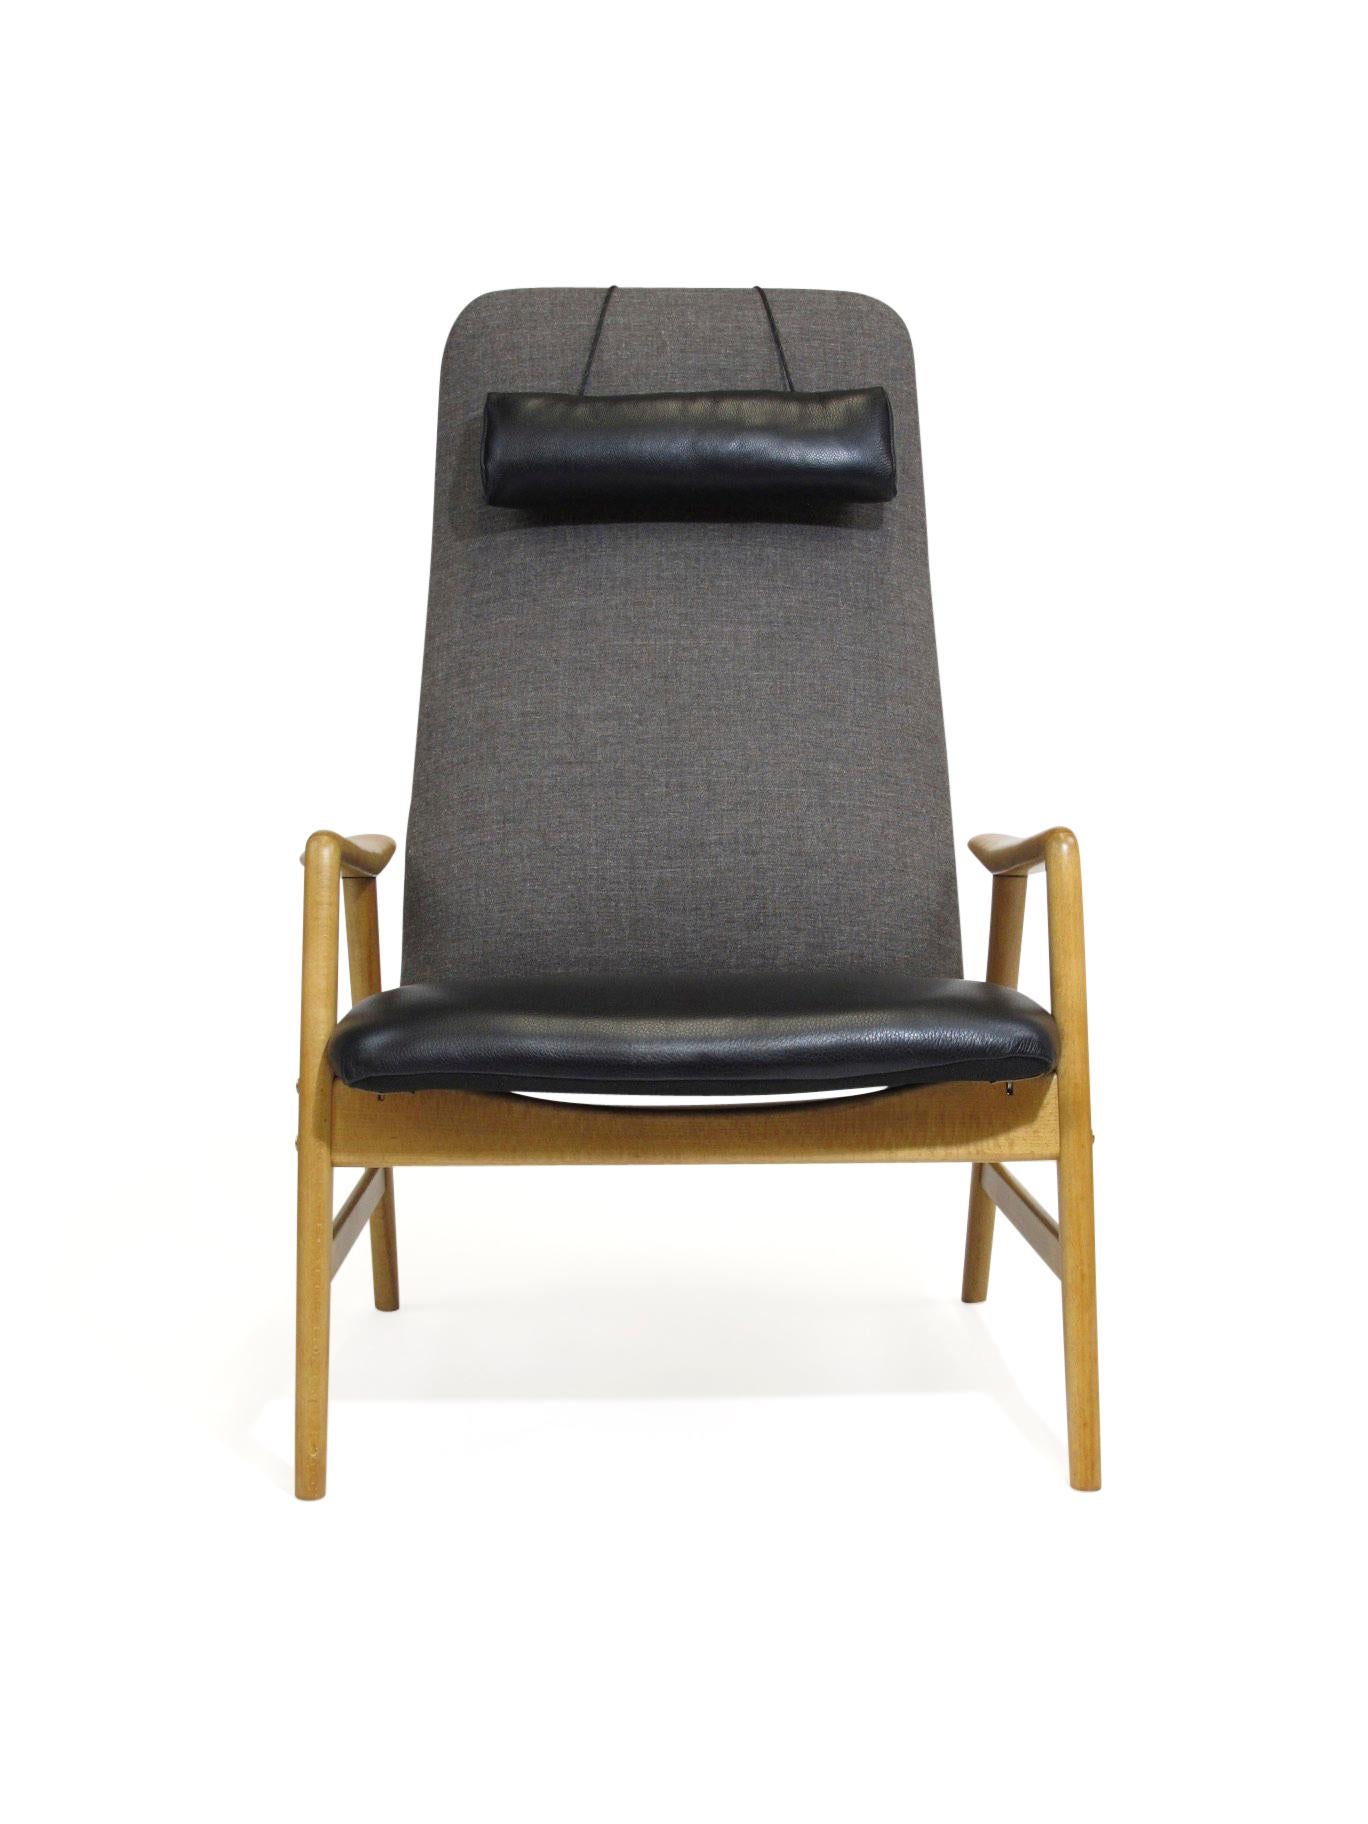 Danish high-back lounge chair design by Alf Svensson for Dux. Comfortable lounge chair with manual reclining position.
Newly upholstered in grey wool and black leather seat and head rest. Solid beech frame has been fully restored.